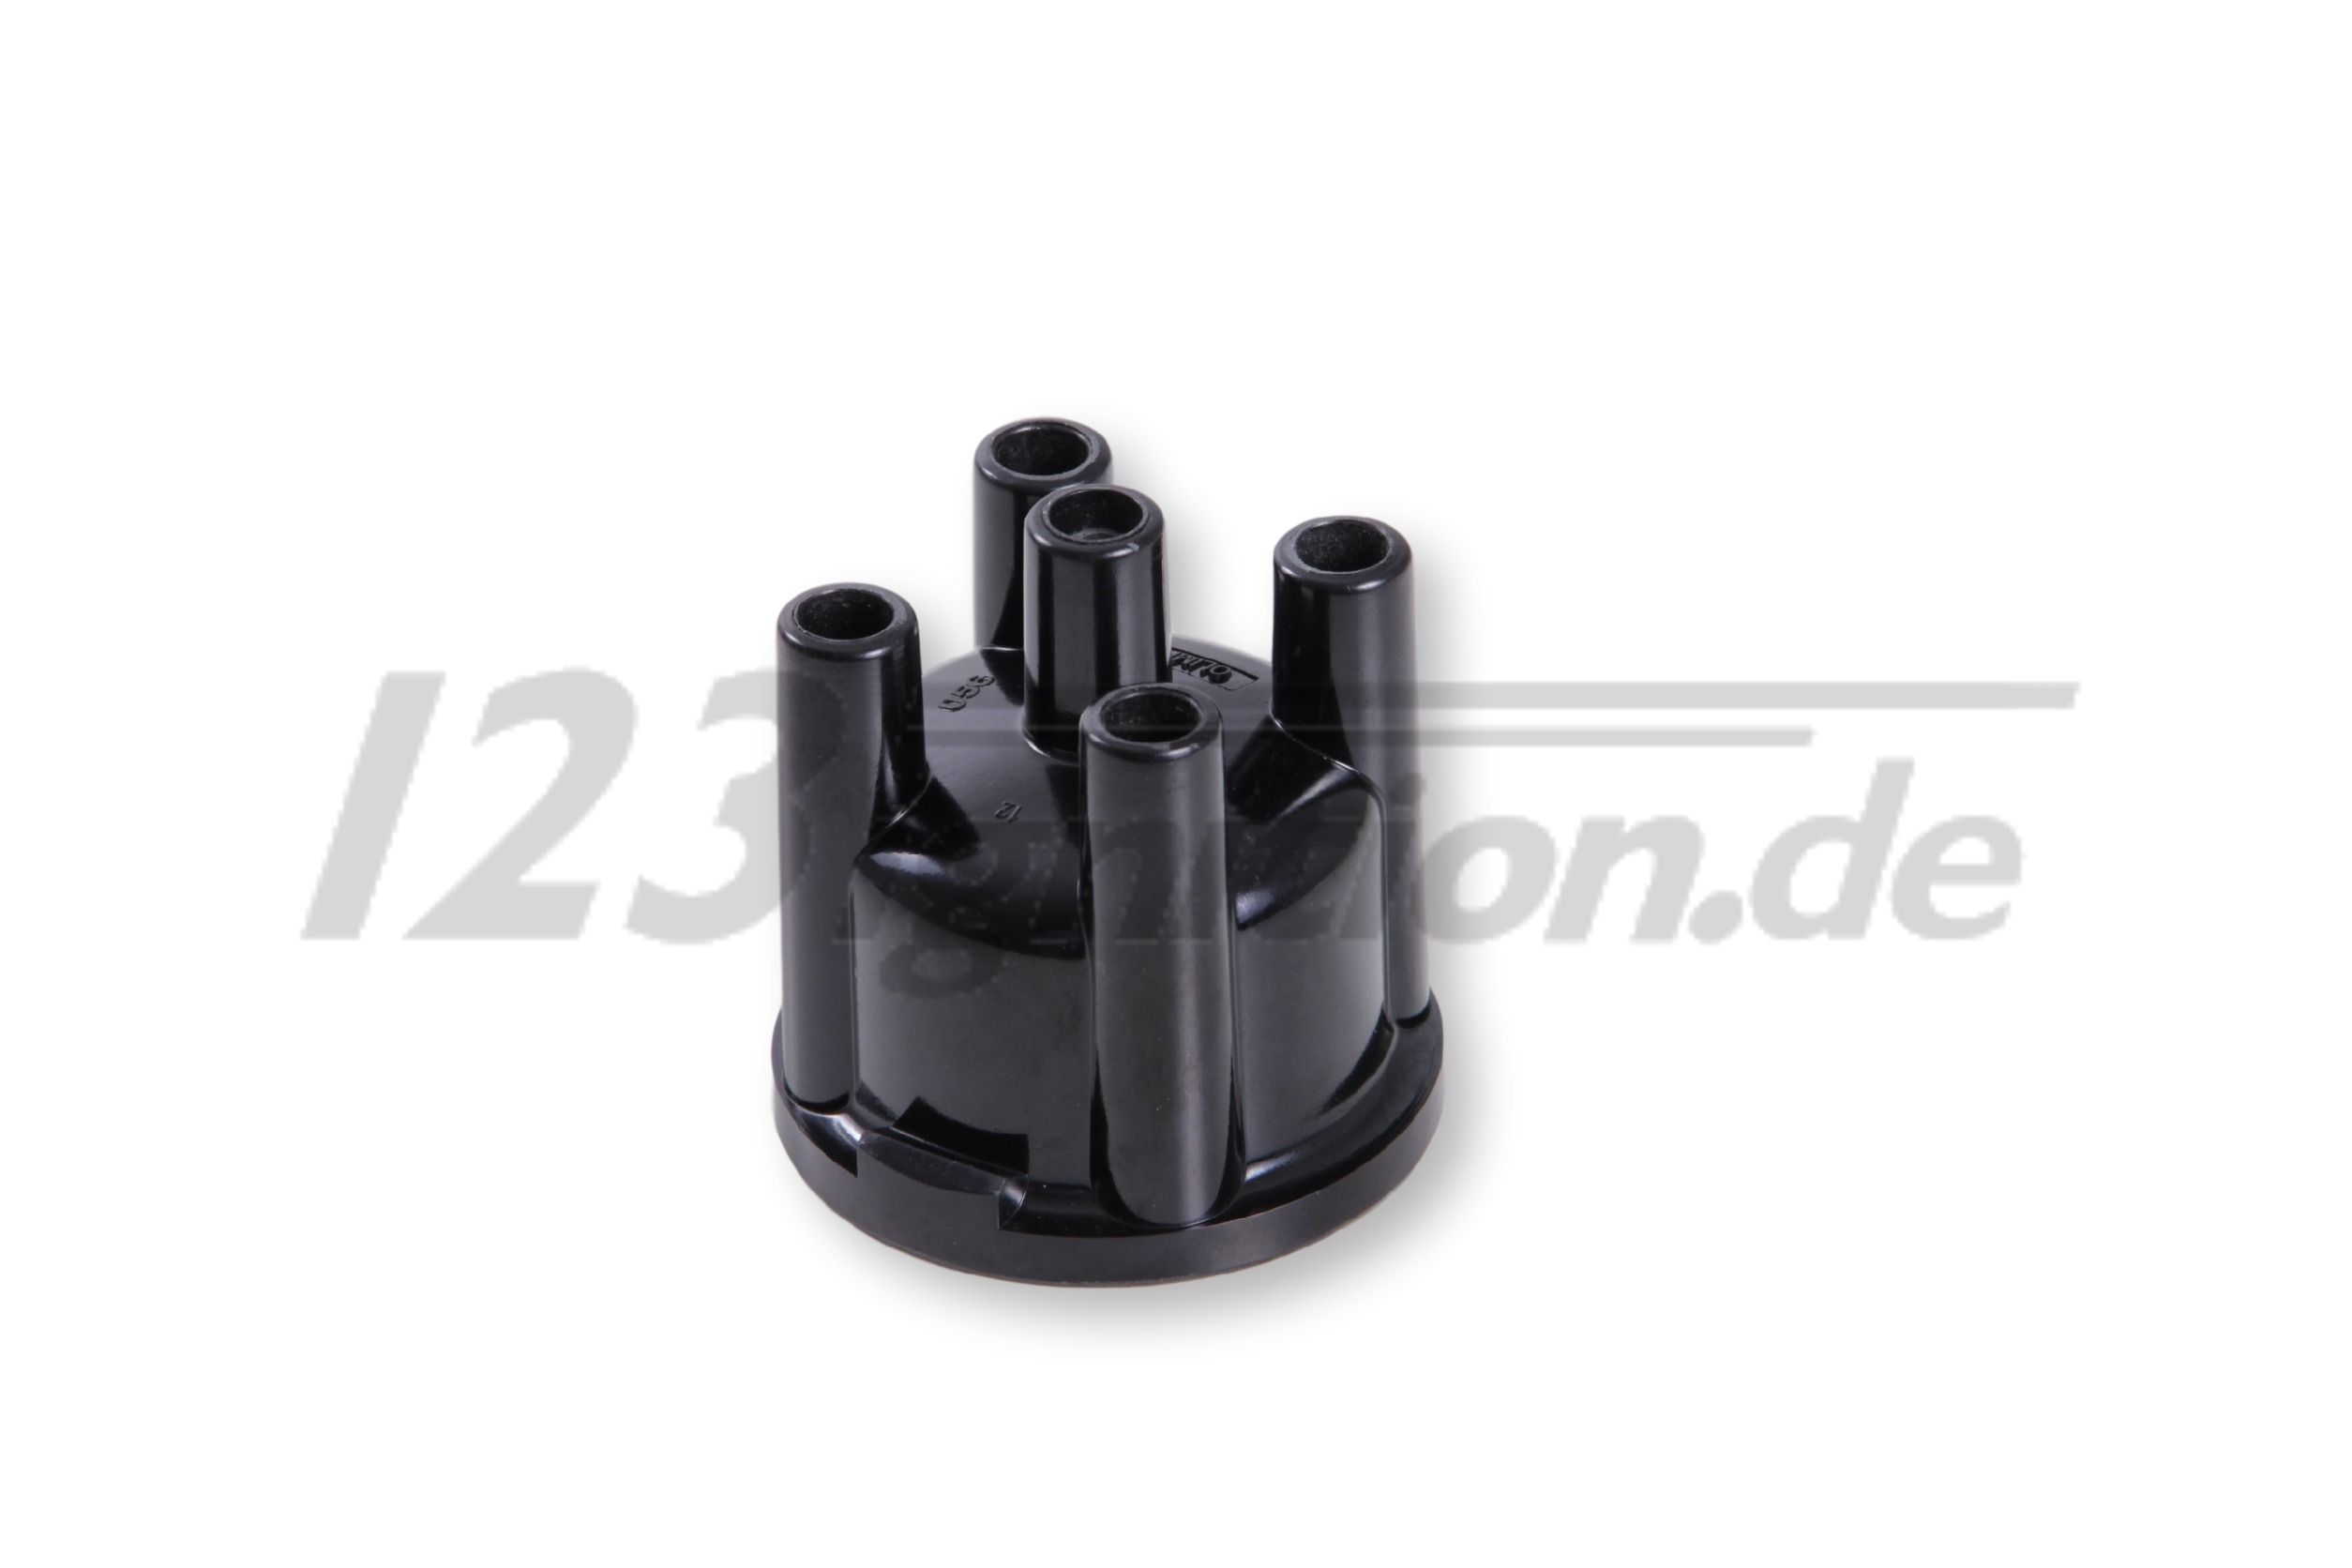 distributor cap for 123 ignition and 123 TUNE distributors for 4 cylinder engines in black